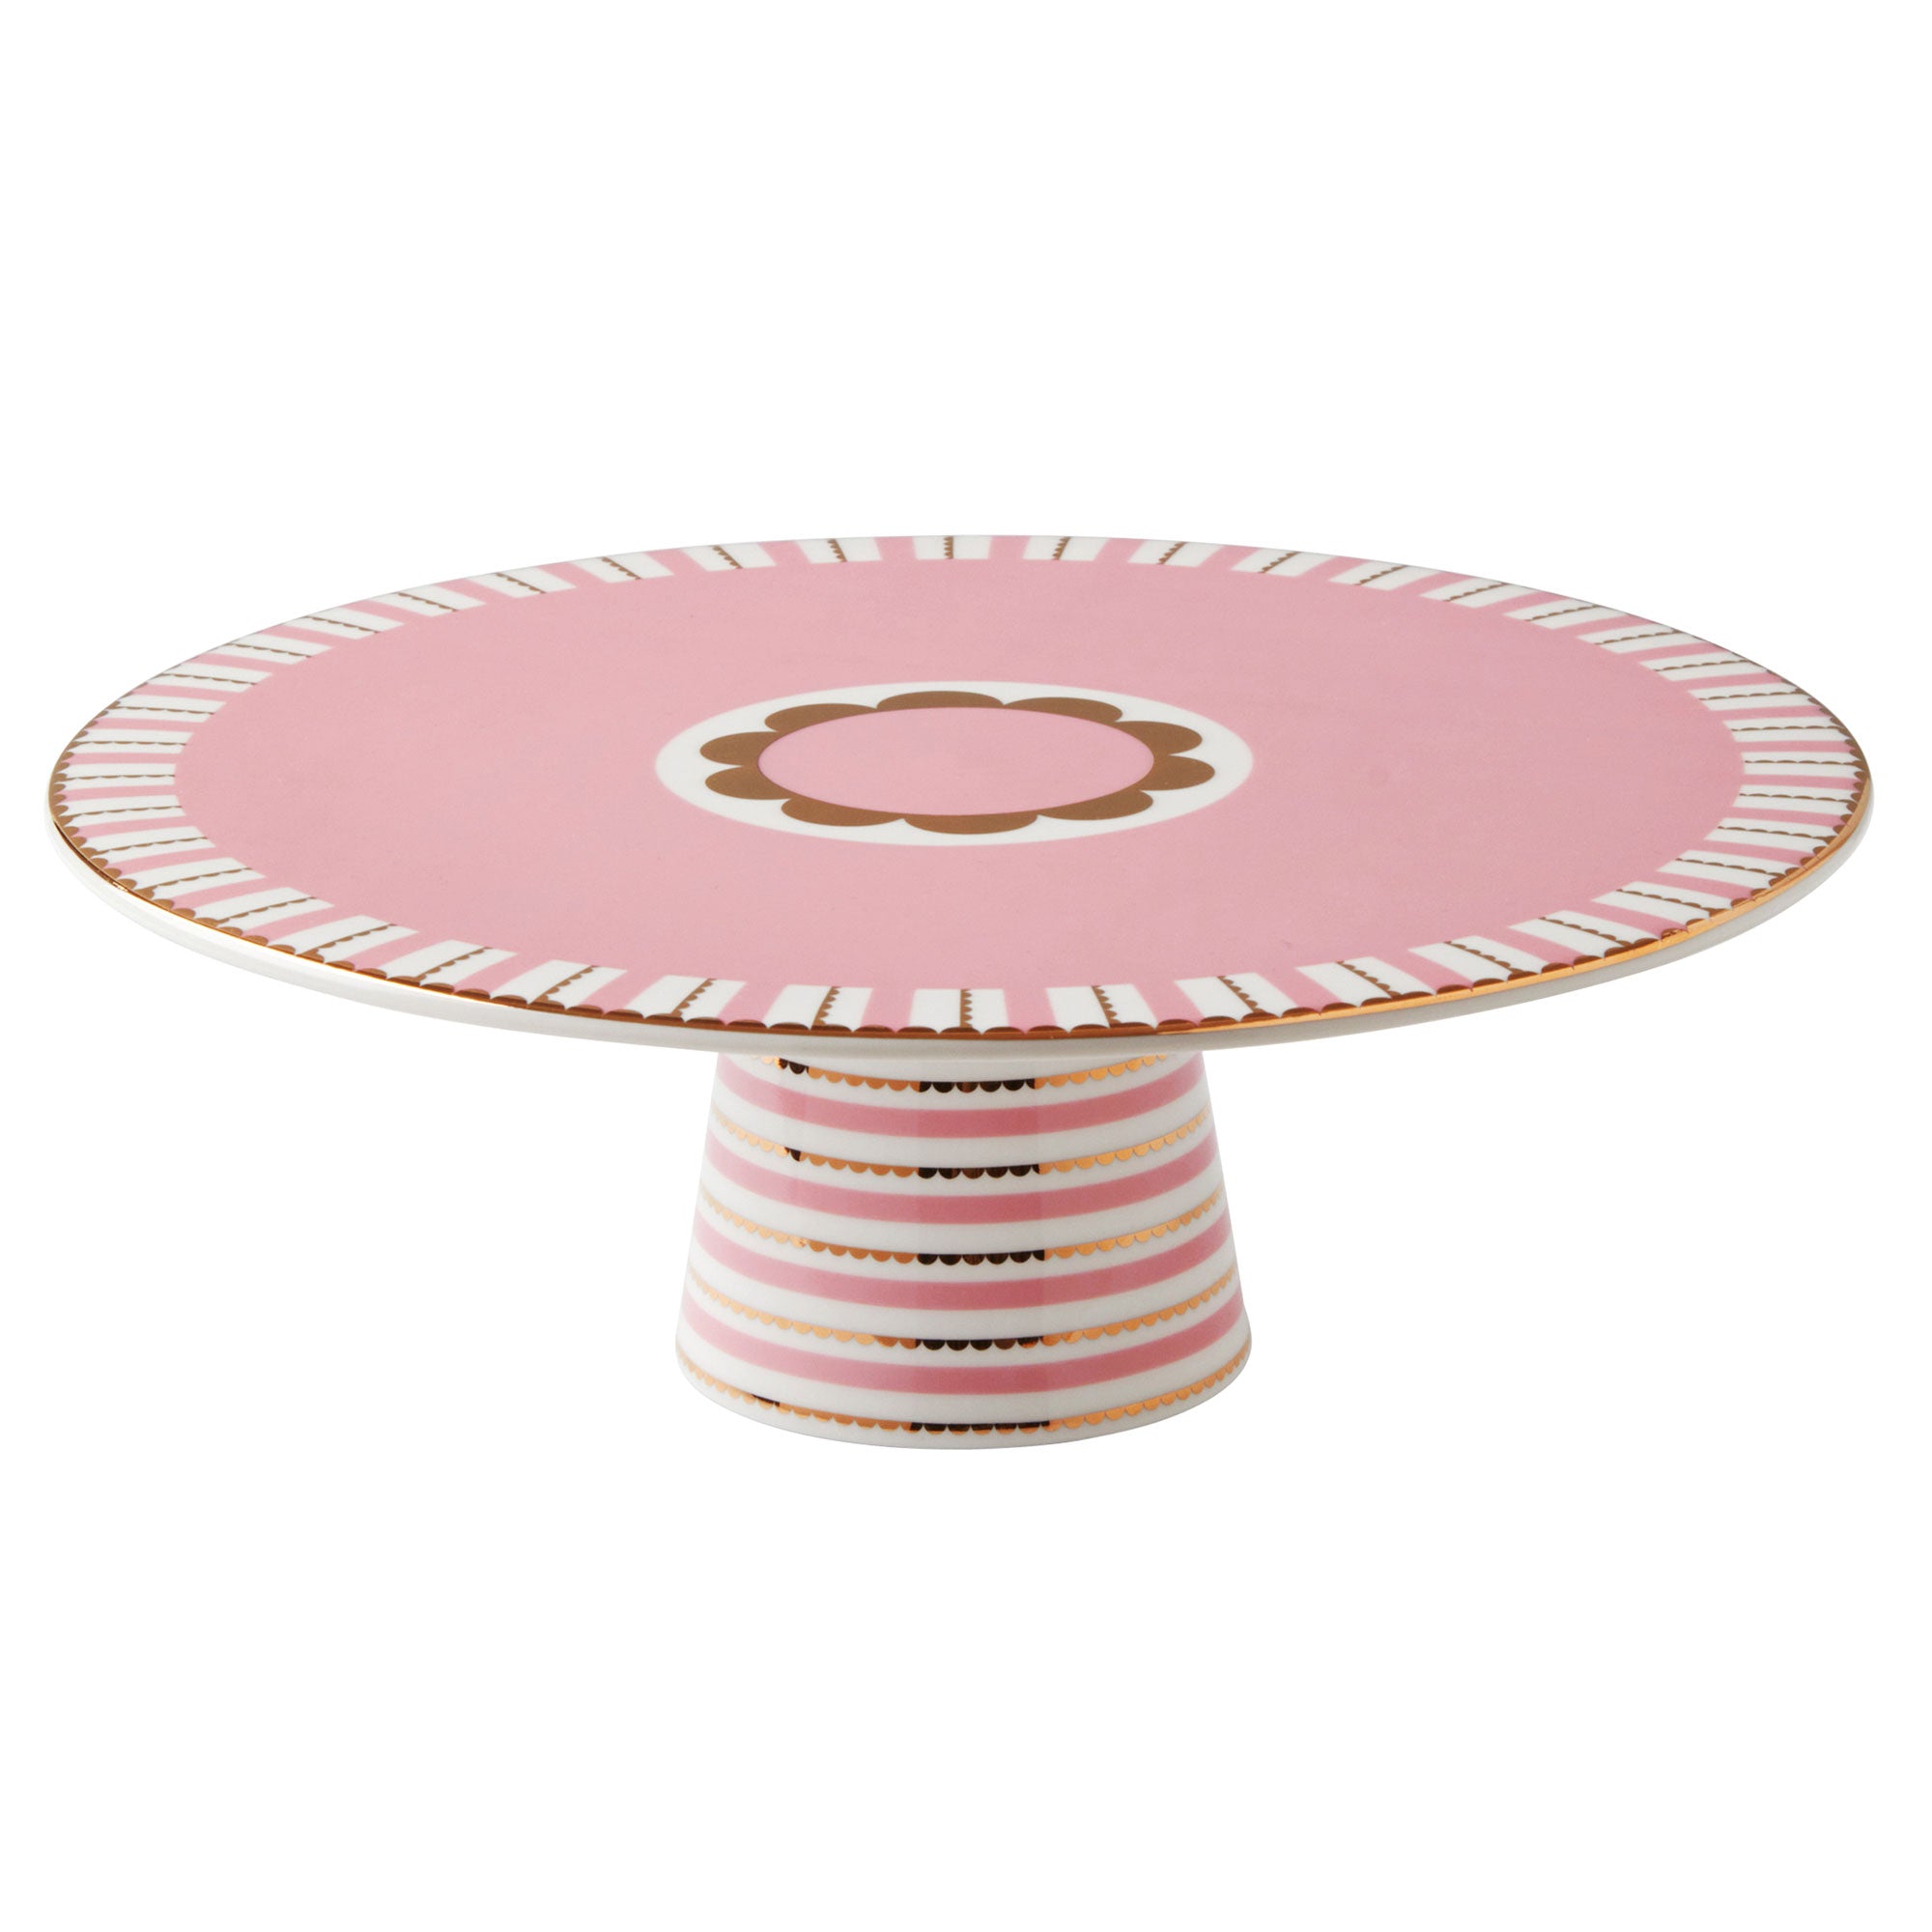 Maxwell & Williams - Teas's & C's Regency Pink Footed Cake Stand